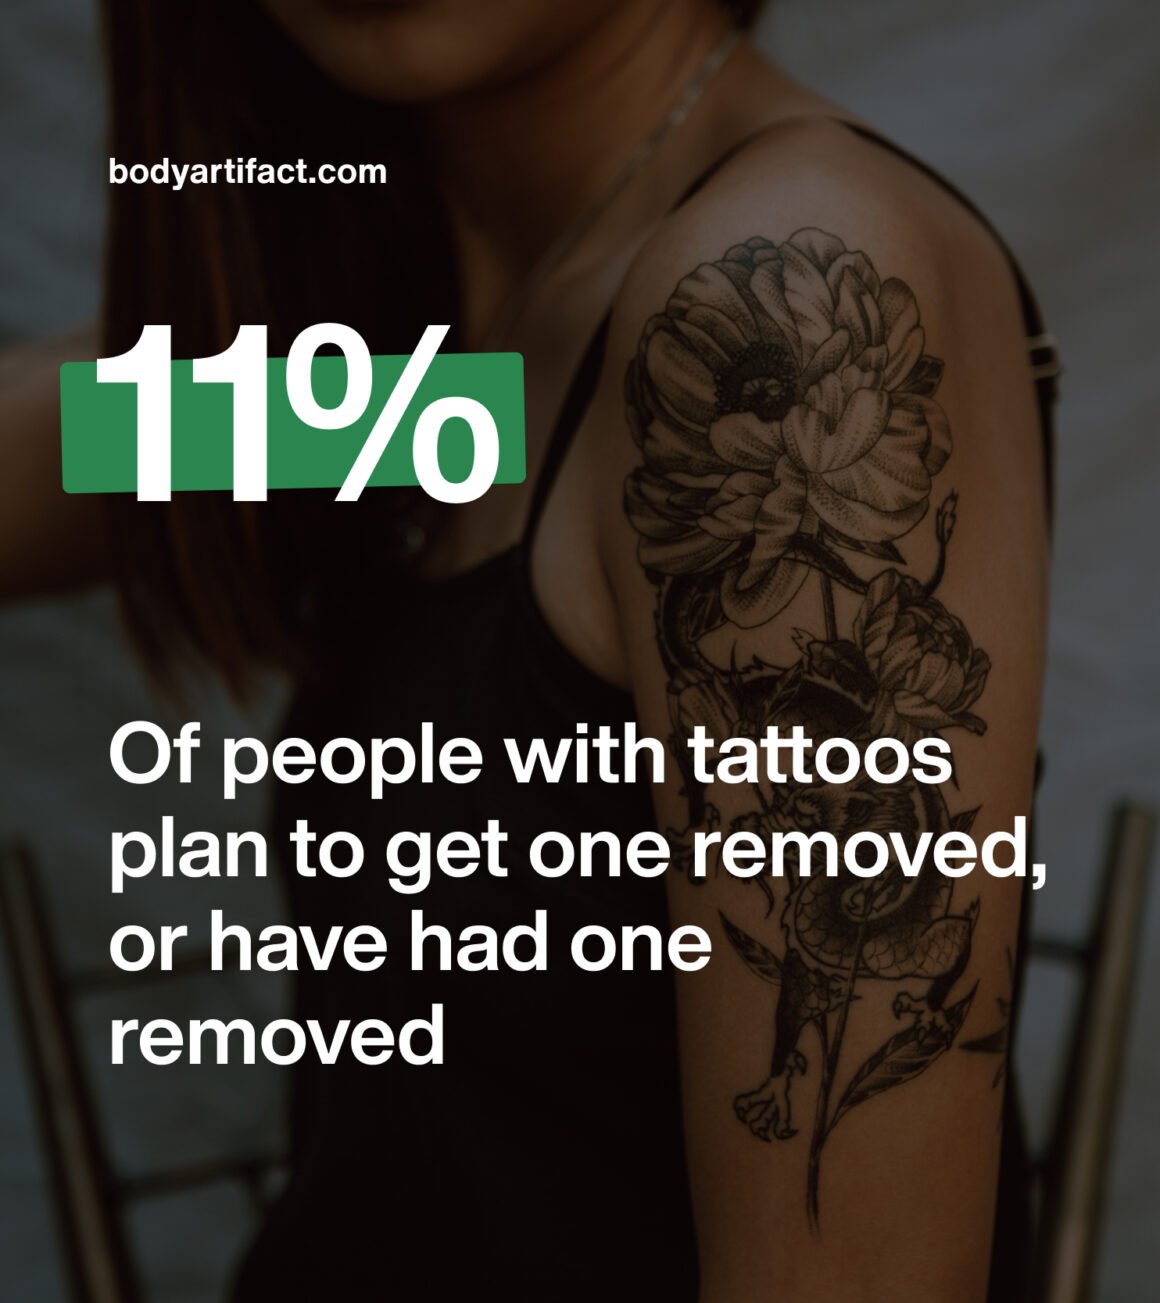 Tattoo Ink Market Global Industry Analysis And Forecast 20232029